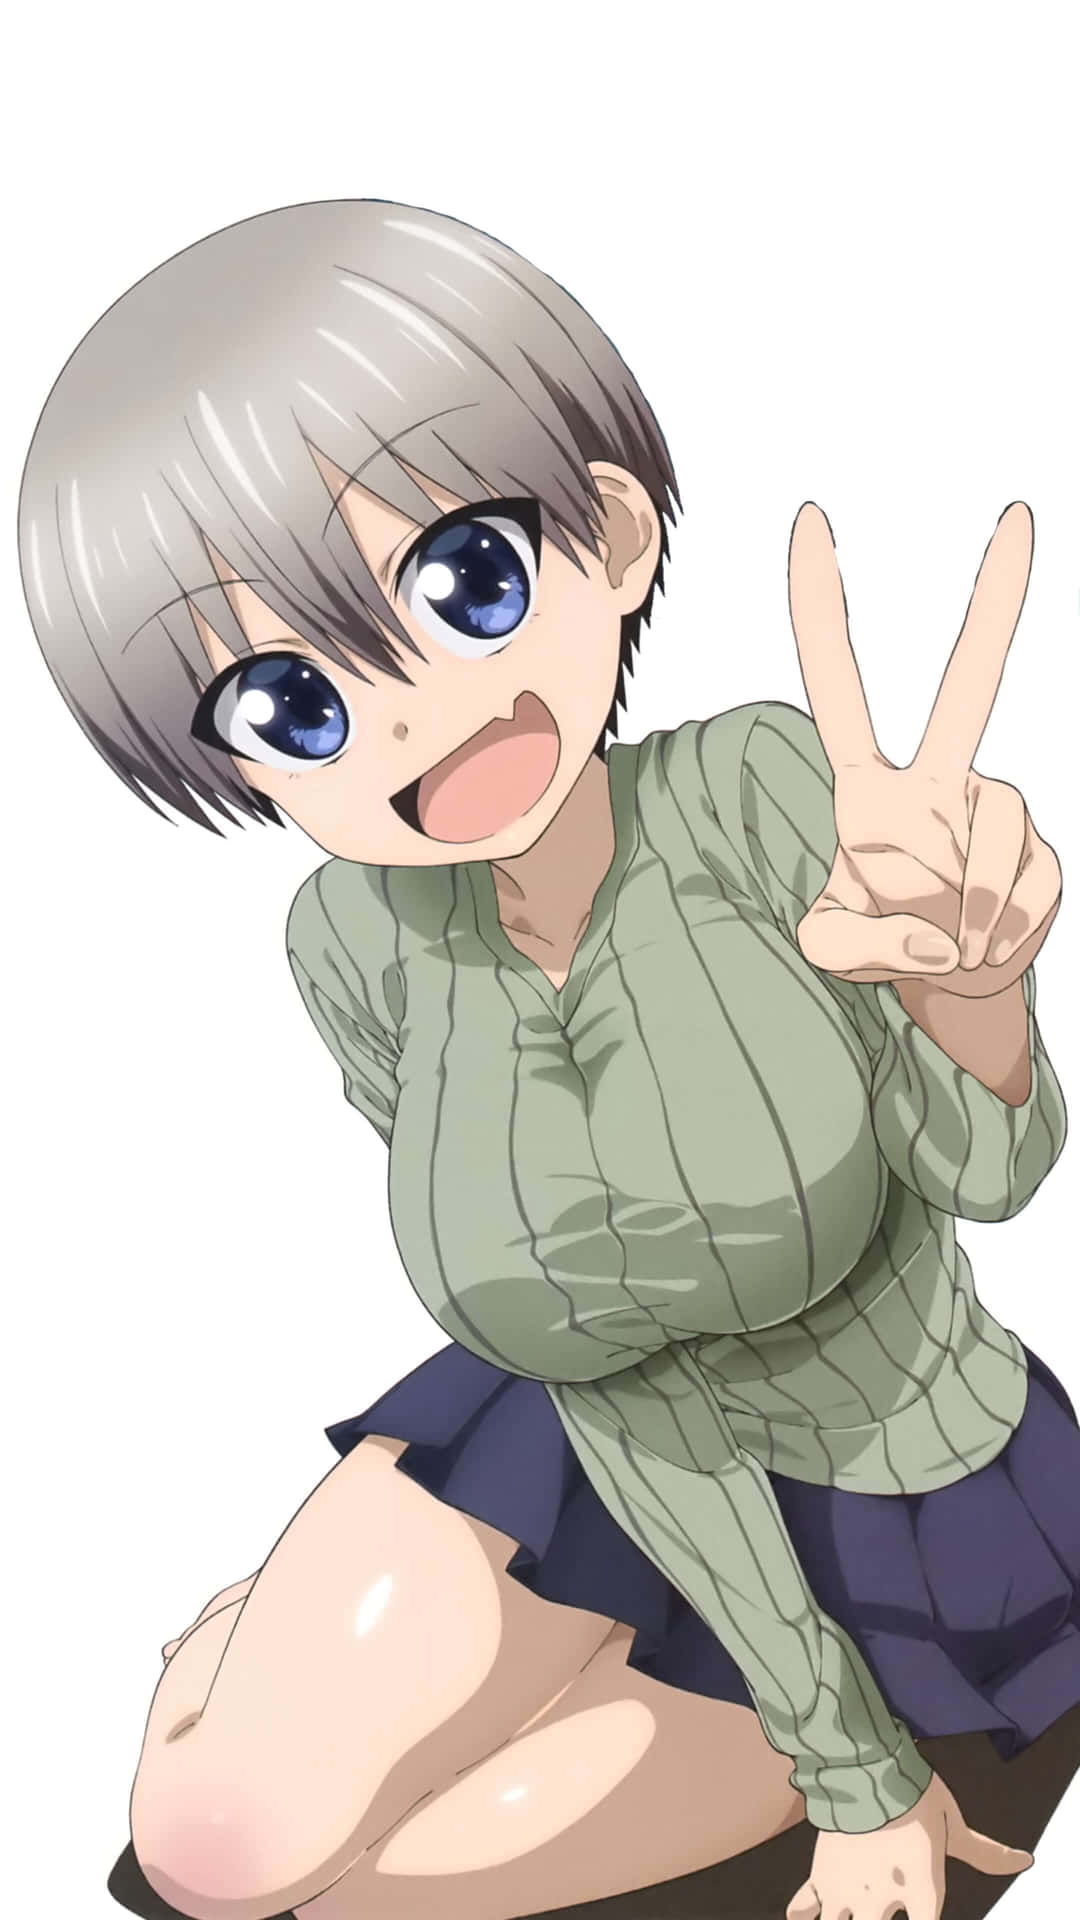 "Uzaki Chan looking cool, confident and carefree!" Wallpaper